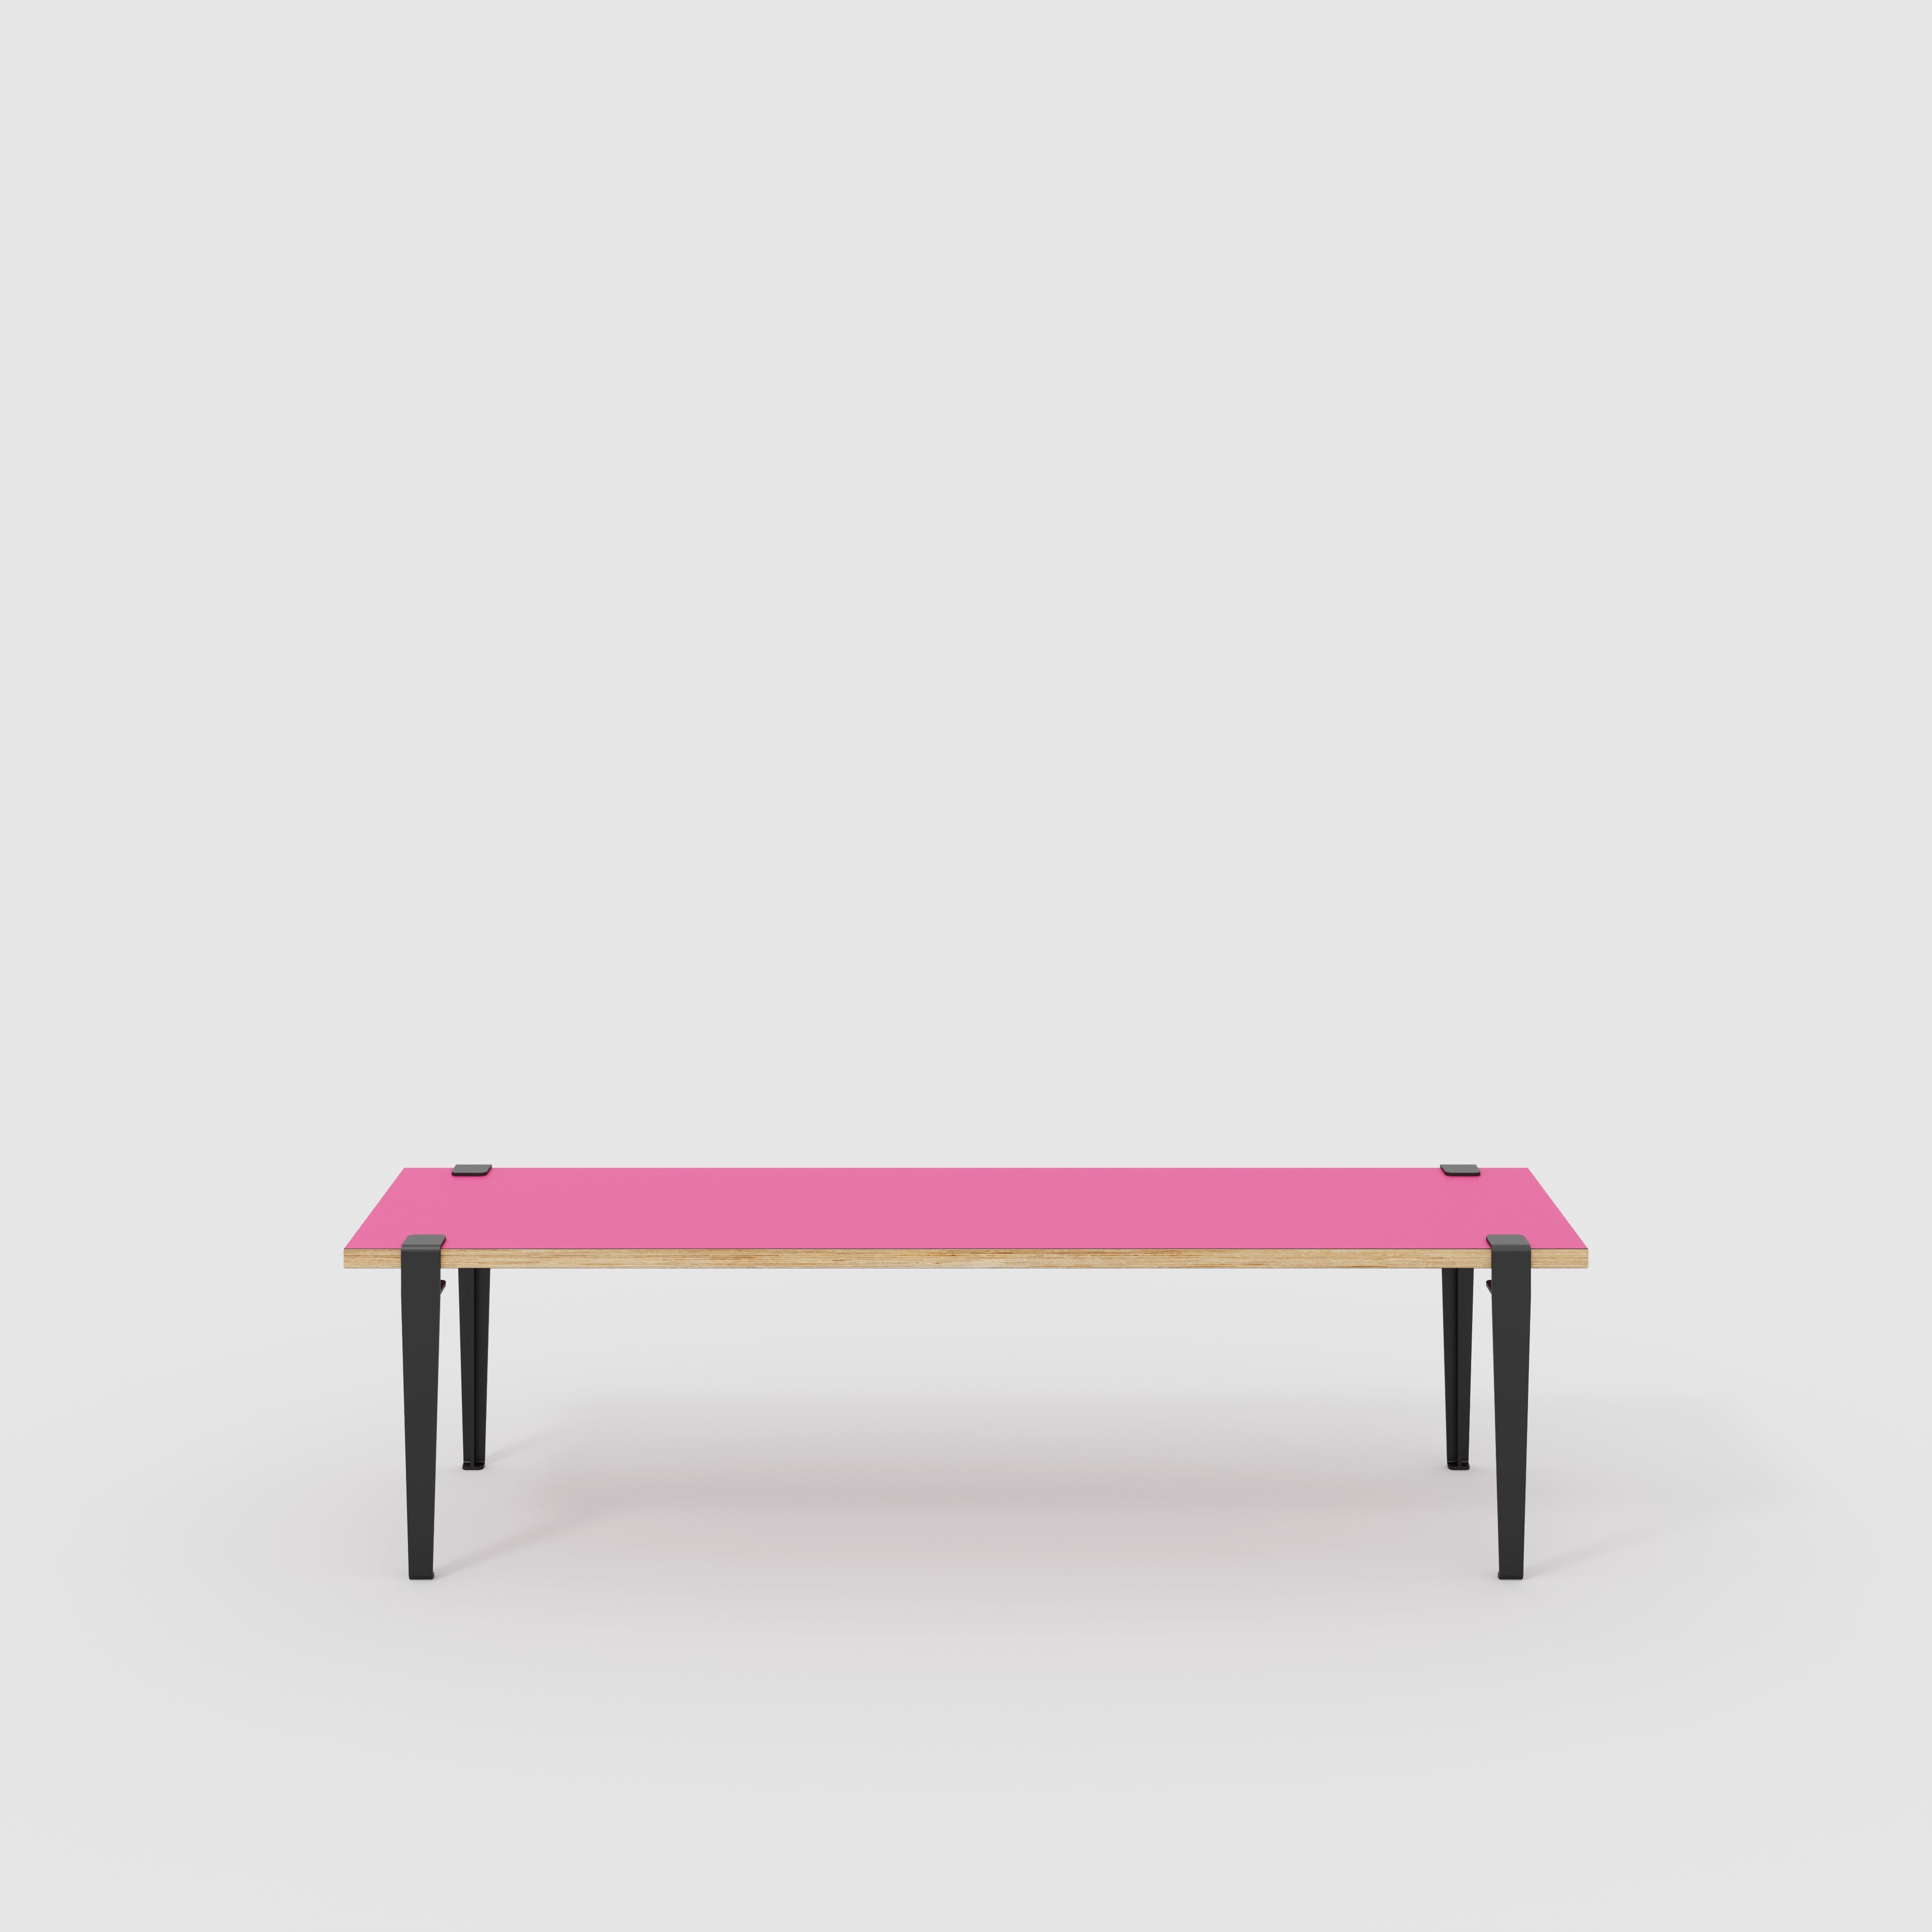 Bench Seat with Black Tiptoe Legs - Formica Juicy Pink - 1600(w) x 400(d) x 450(h)